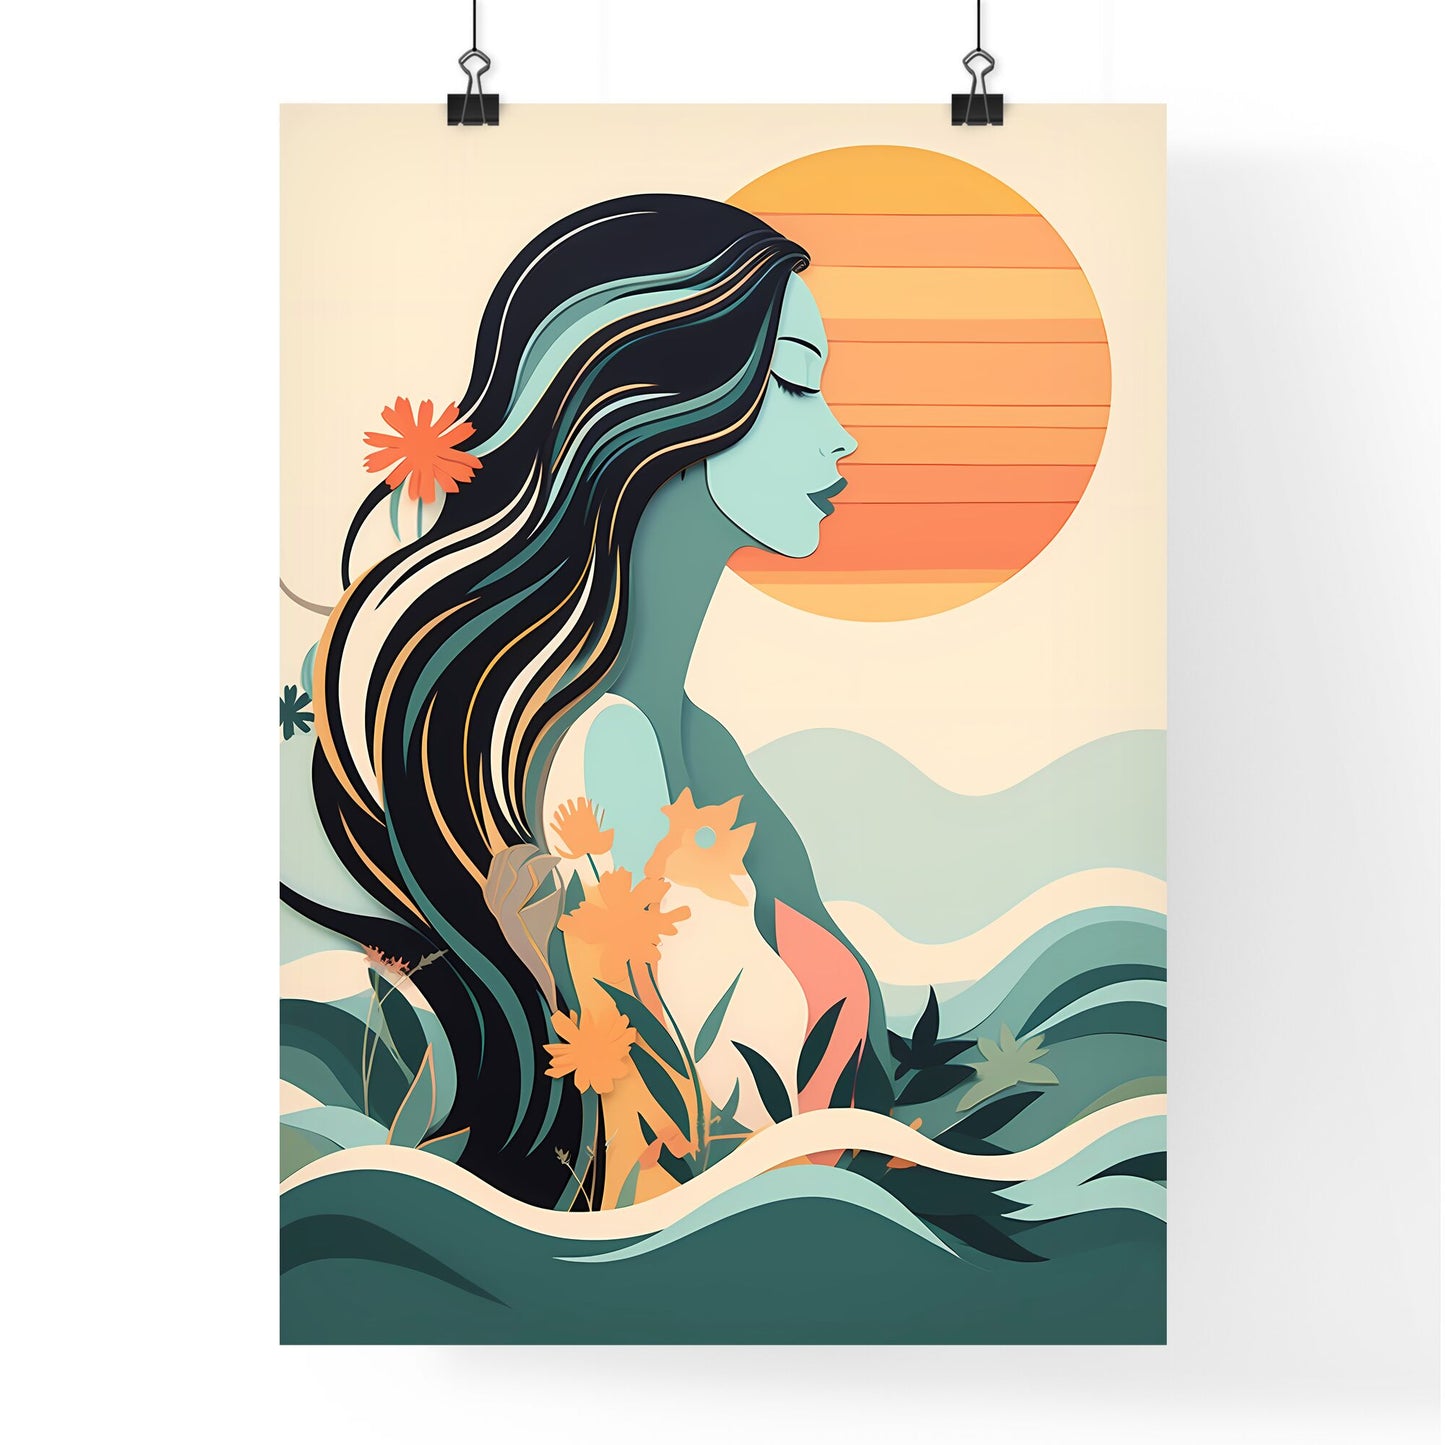 Woman With Long Hair And Flowers In Front Of The Sun Art Print Default Title